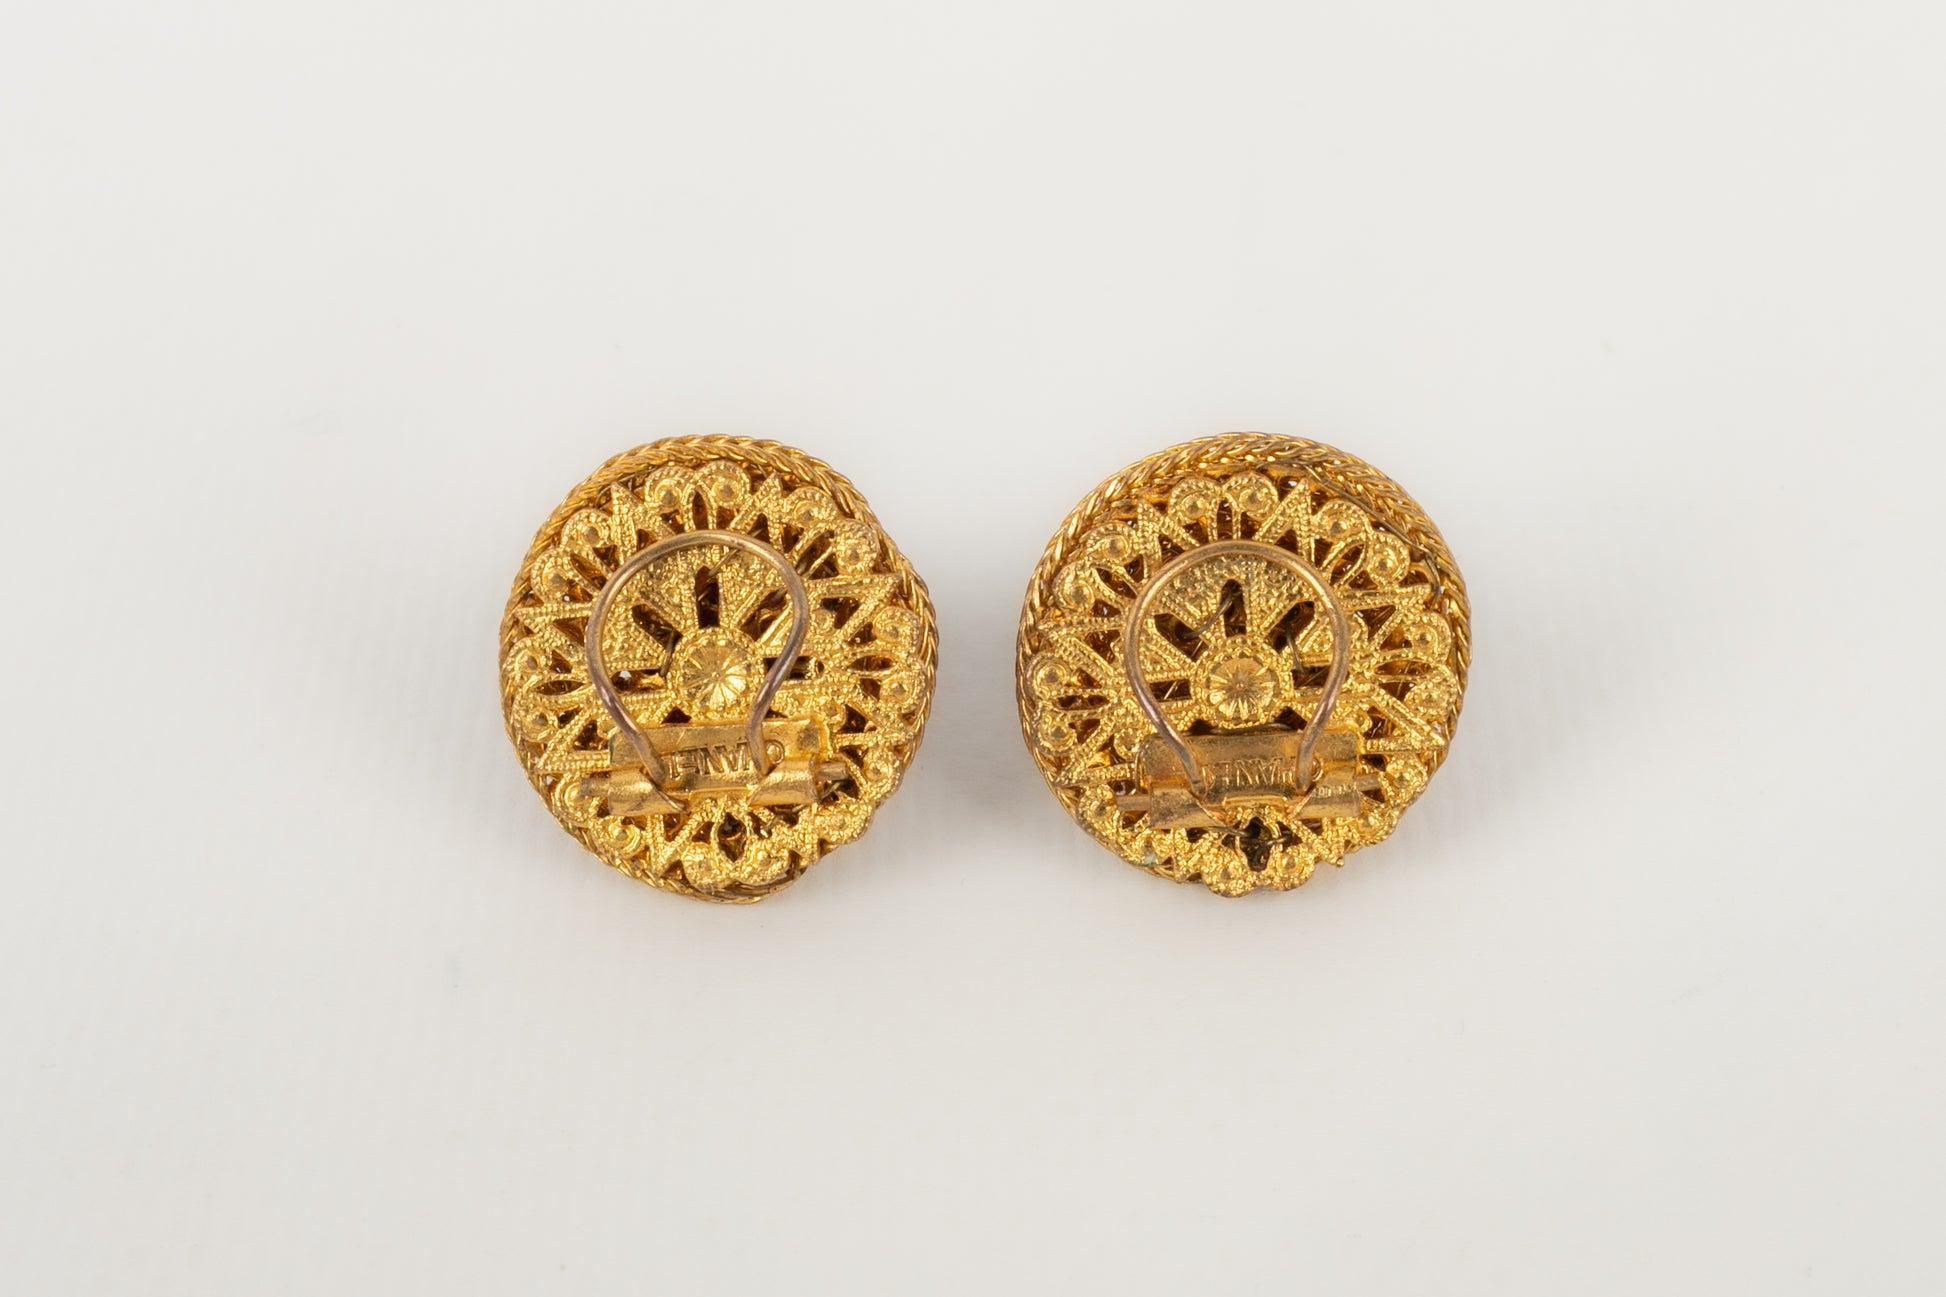 Chanel - Clip-on earrings with central costume pearls ornamented with glass paste cabochons and surrounded with a golden chain. Haute Couture jewelry from the Coco era, designed by the Rousselet atelier.

Additional information:
Condition: Very good